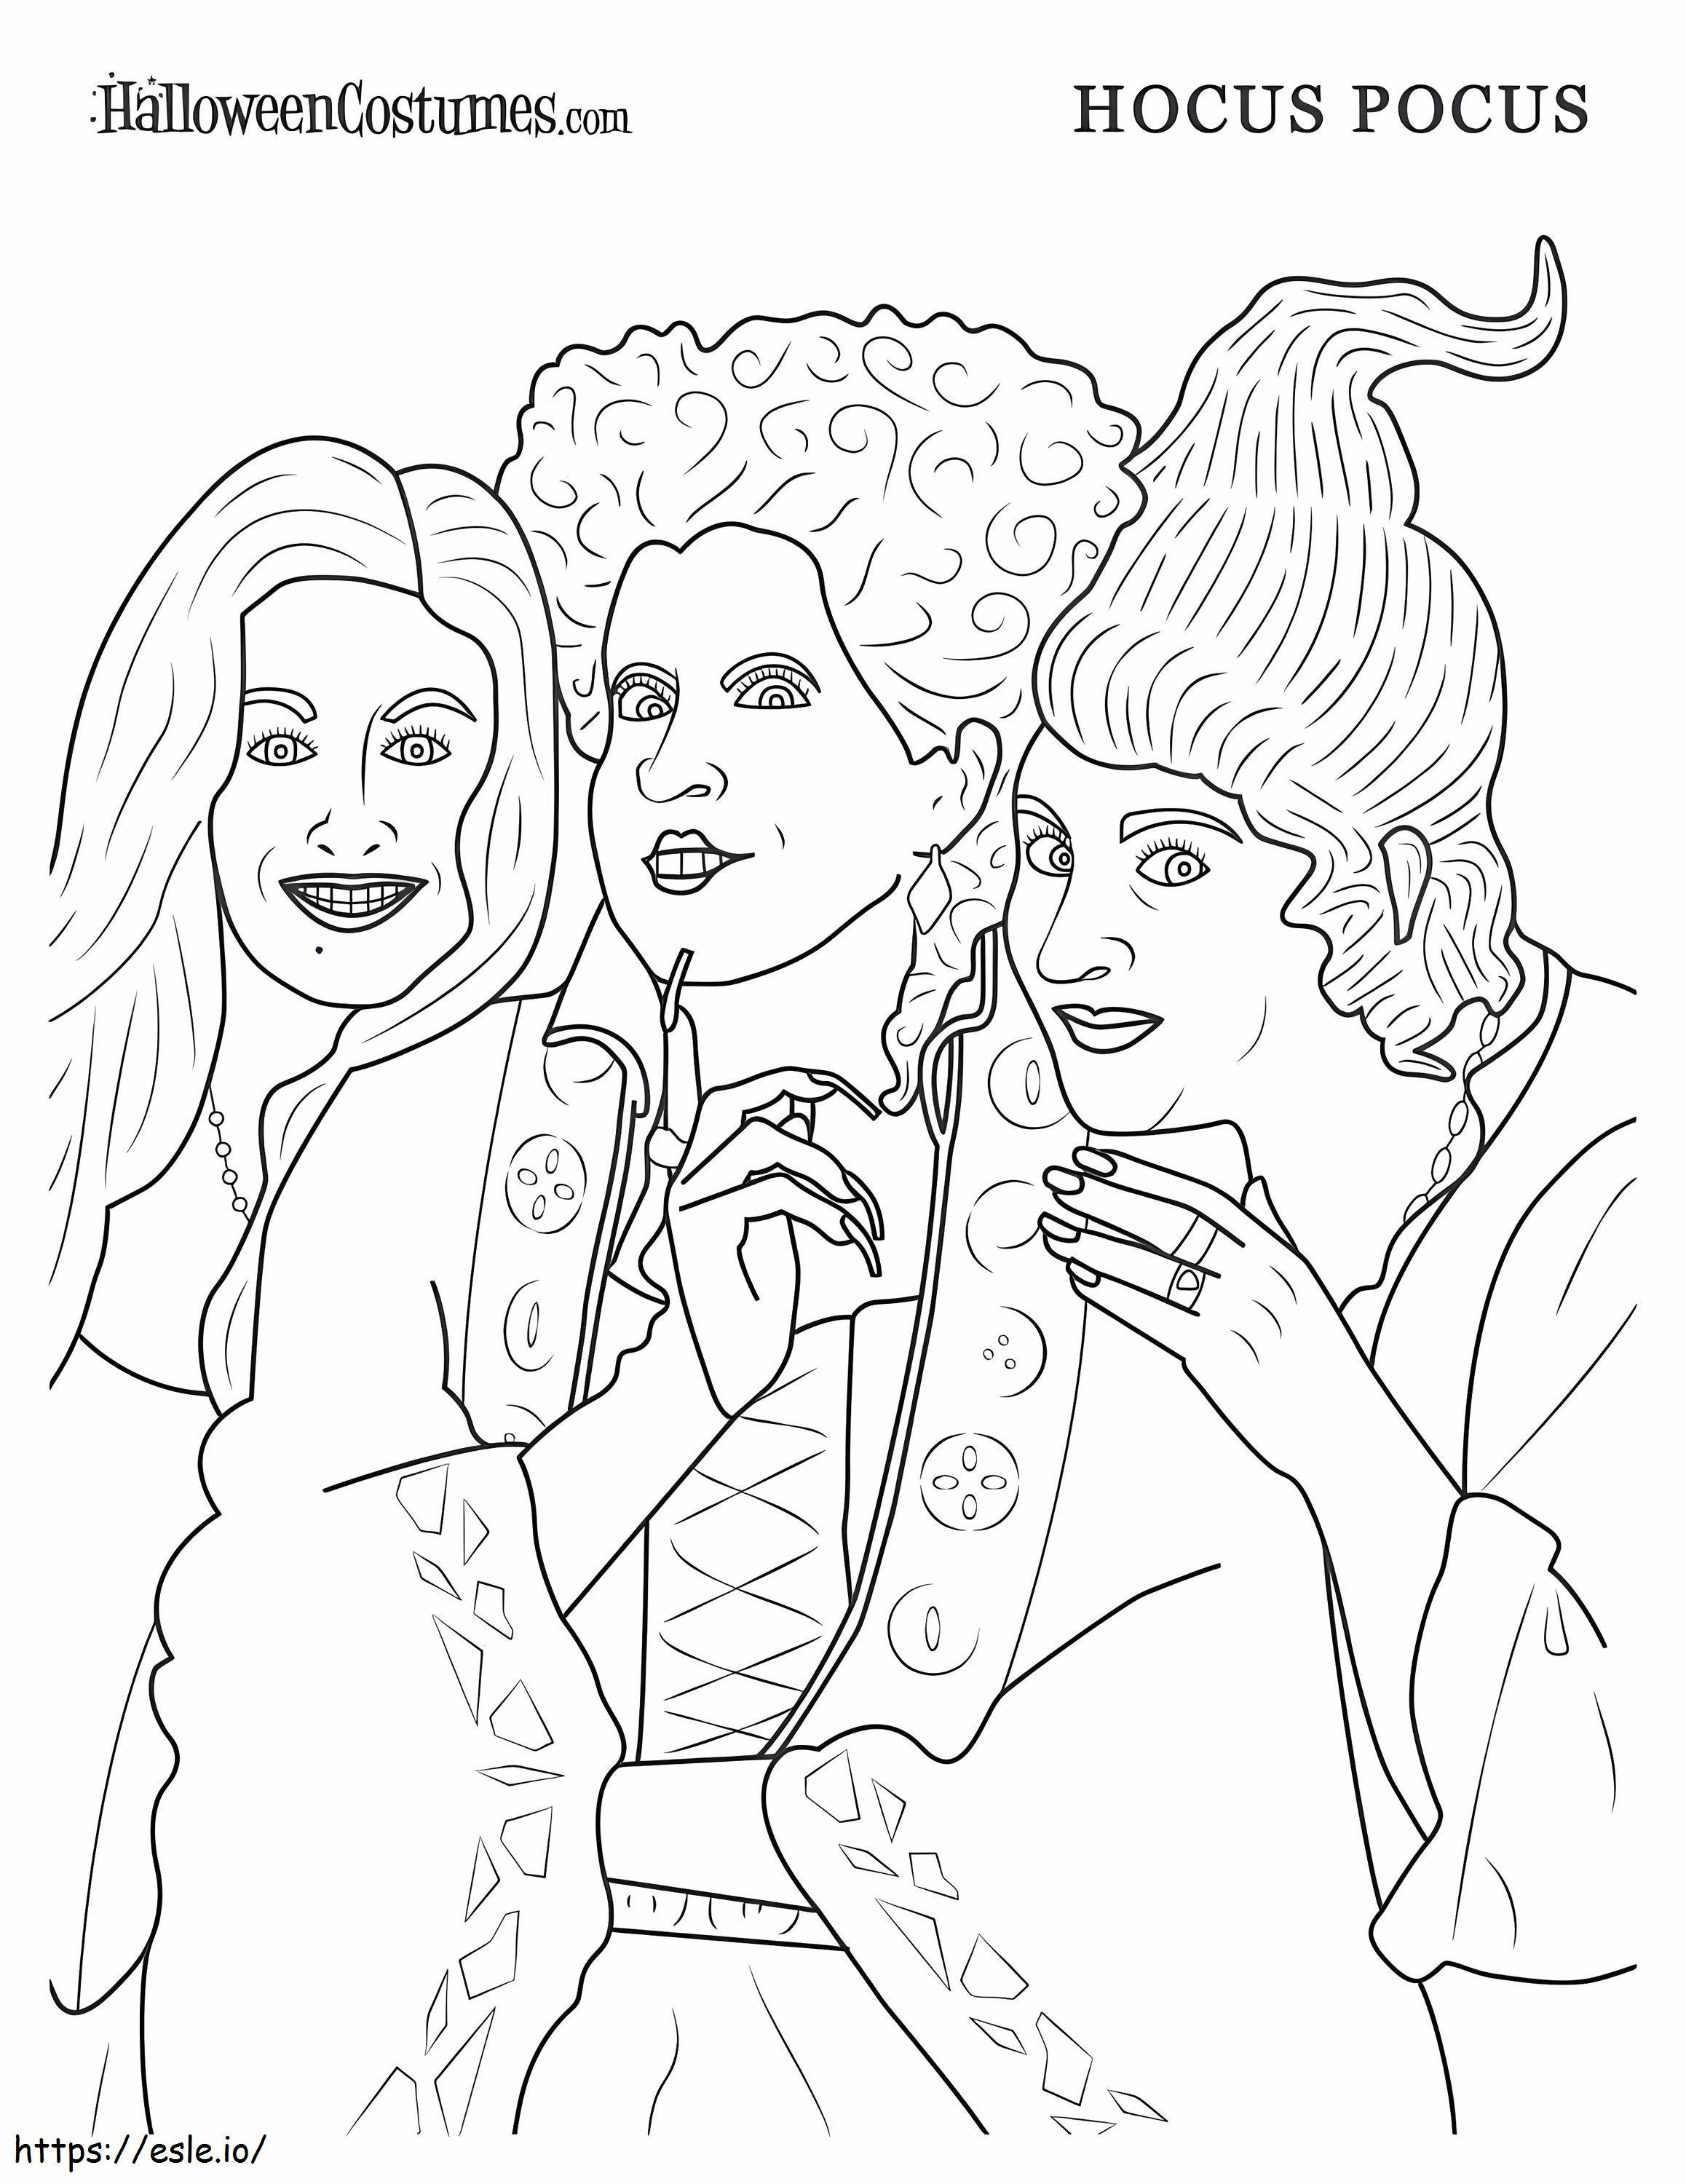 Hocus Pocus To Color coloring page